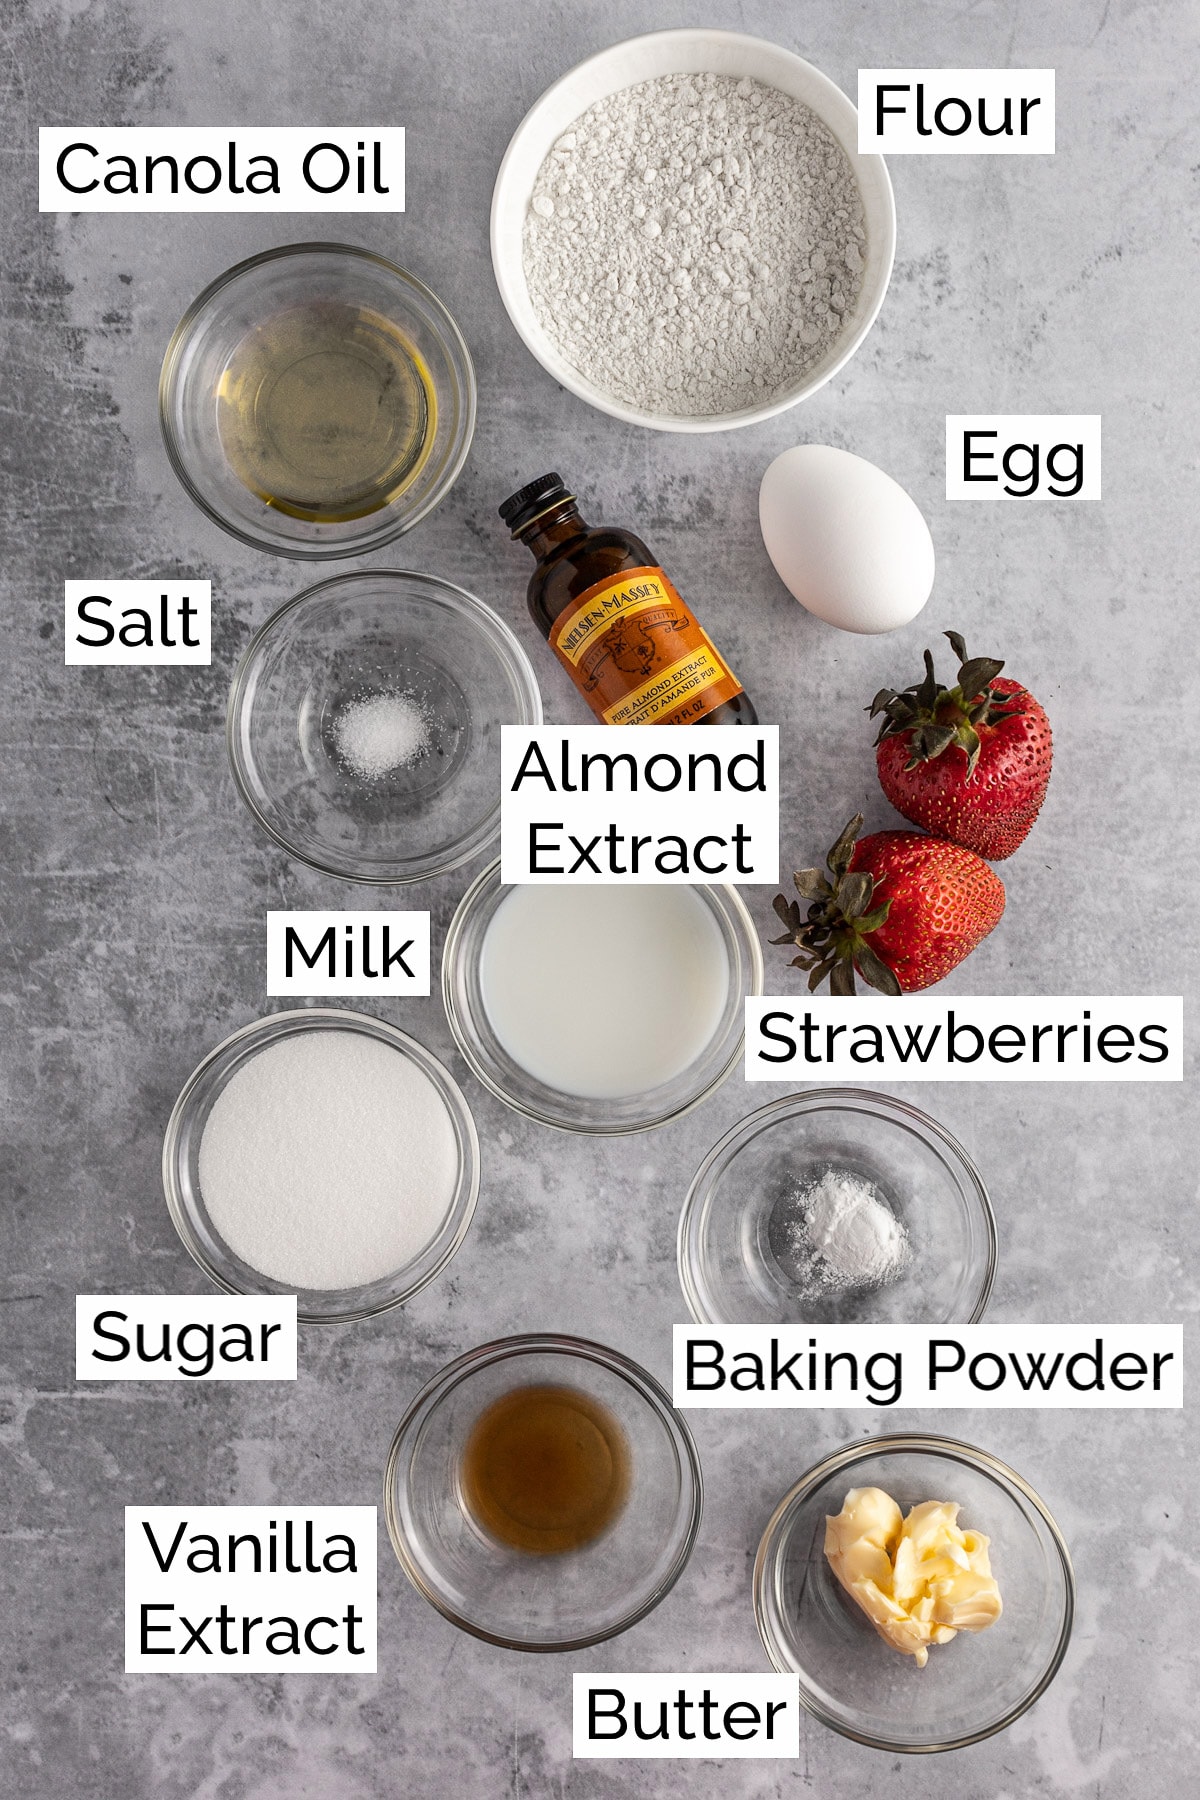 Overhead view of the ingredients needed to make the strawberry cake.